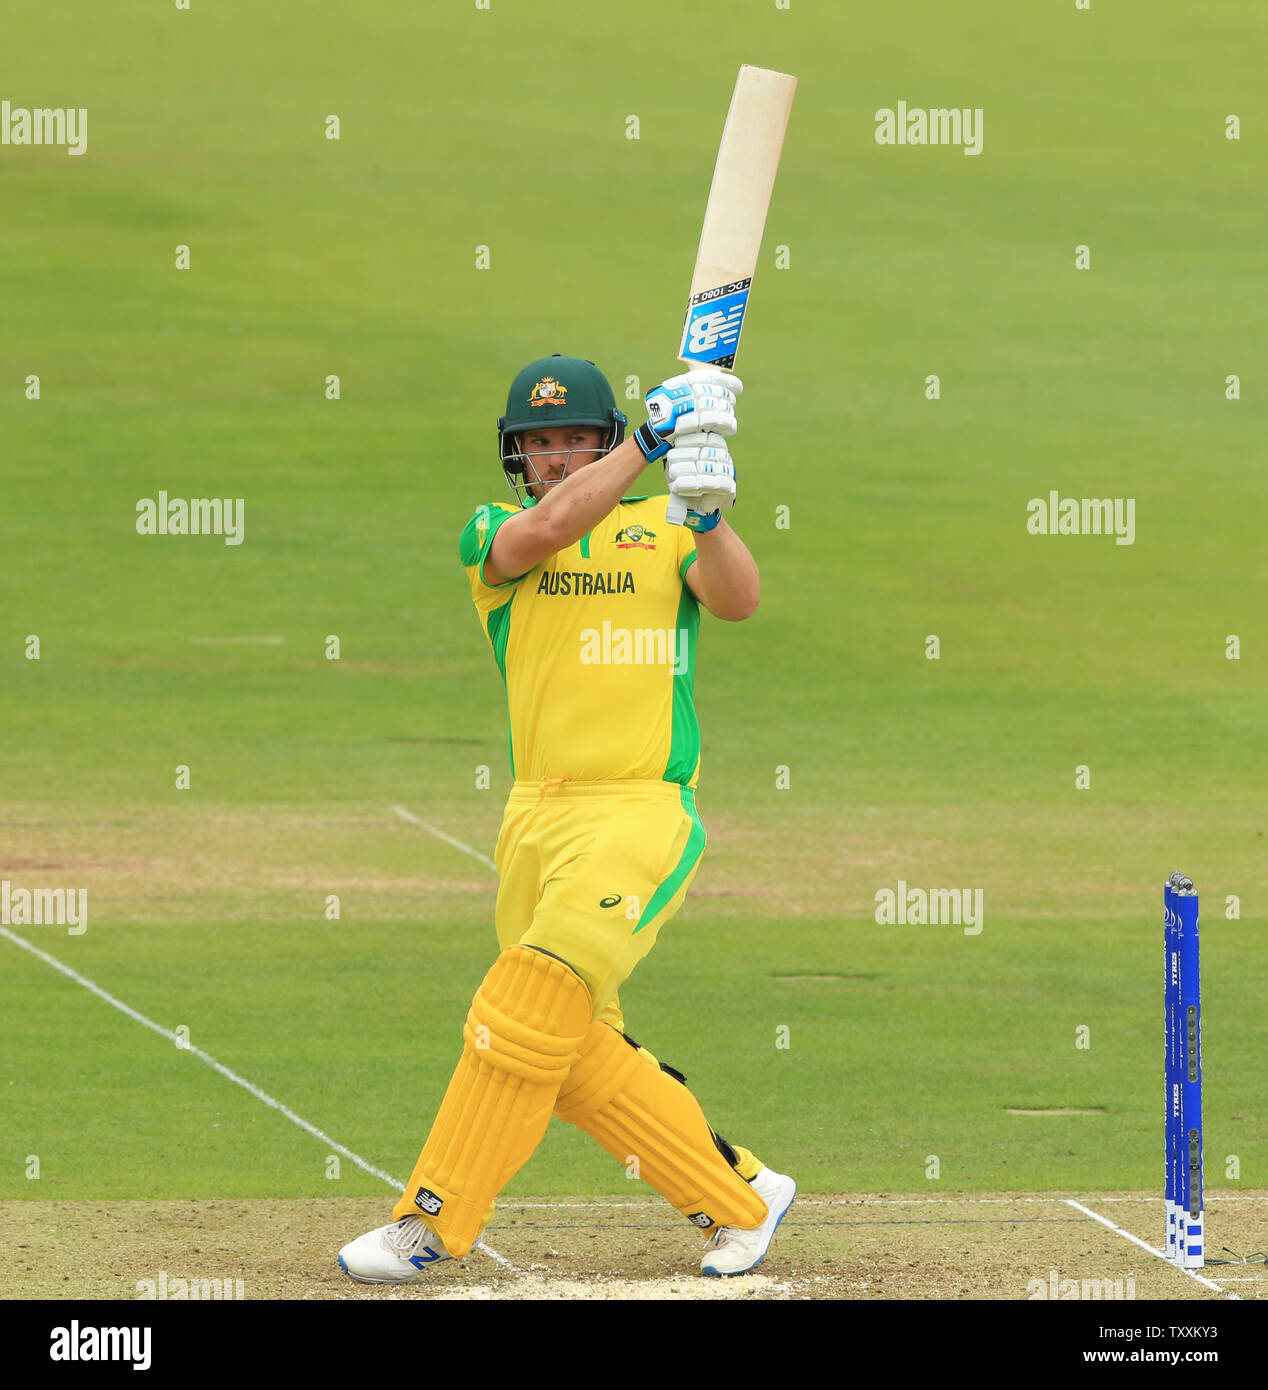 London, UK. 25th June, 2019. Aaron Finch of Australia batting during the England v Australia, ICC Cricket World Cup match, at Lords, London, England. Credit: Cal Sport Media/Alamy Live News Stock Photo